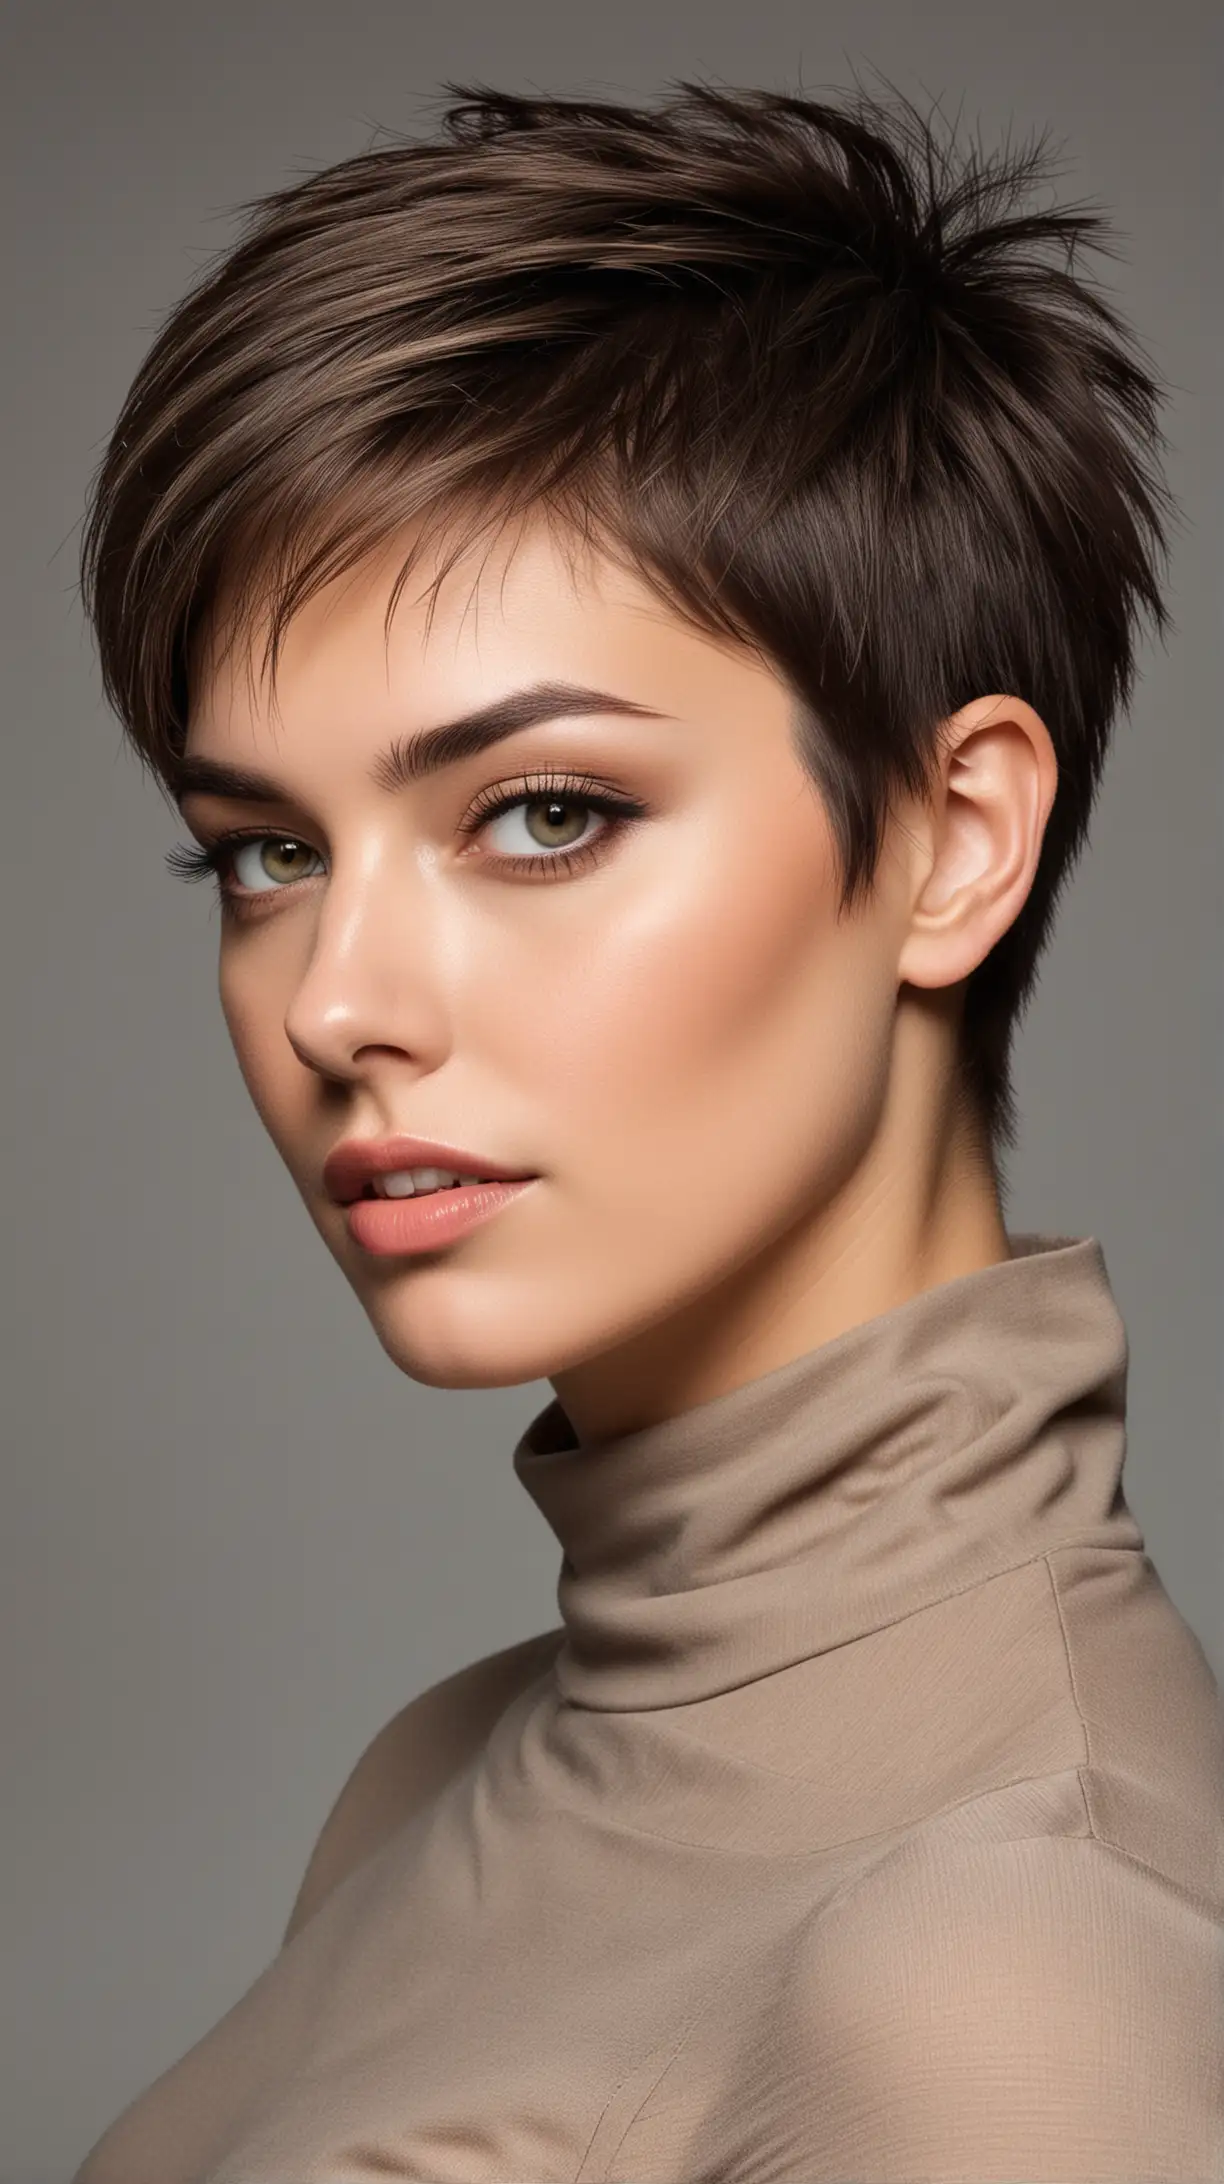 Beautiful girl model, haircut - Styling Wolf Cut - from sleek back looks to wild, clean face, age 30